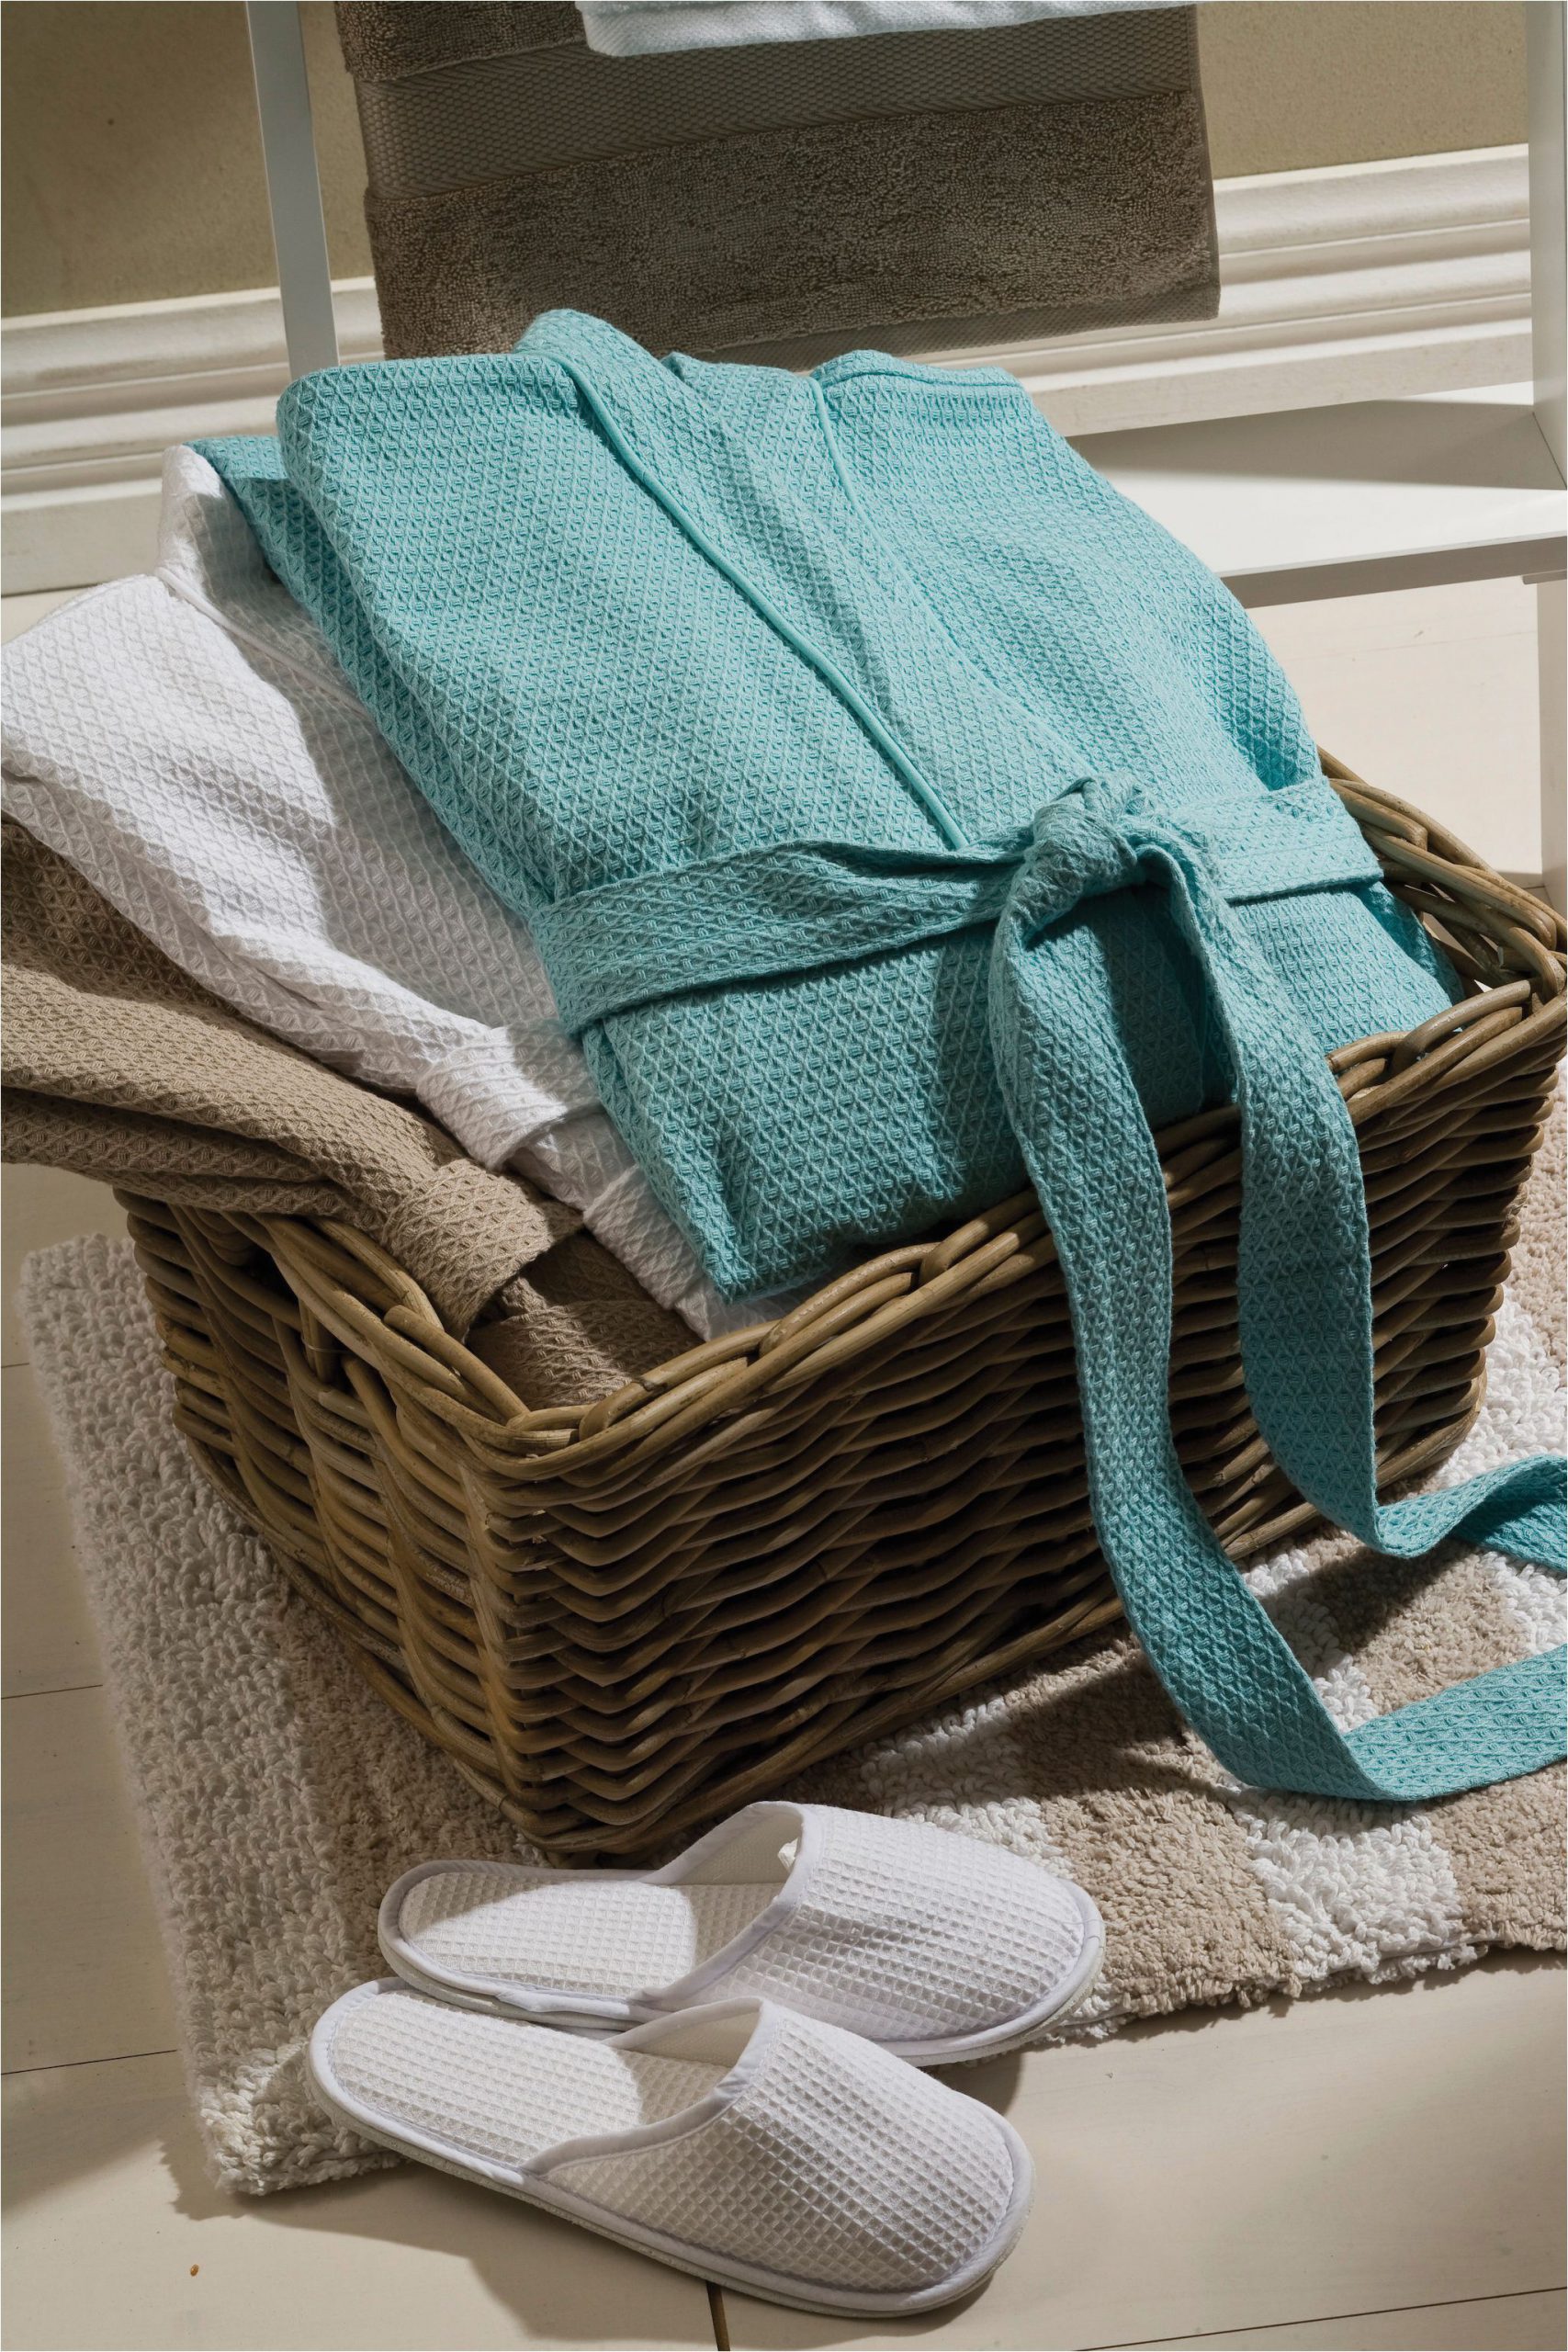 Silver Bath towels and Rugs Coordinate the Bliss Waffle Robe and Slippers to Evoke A